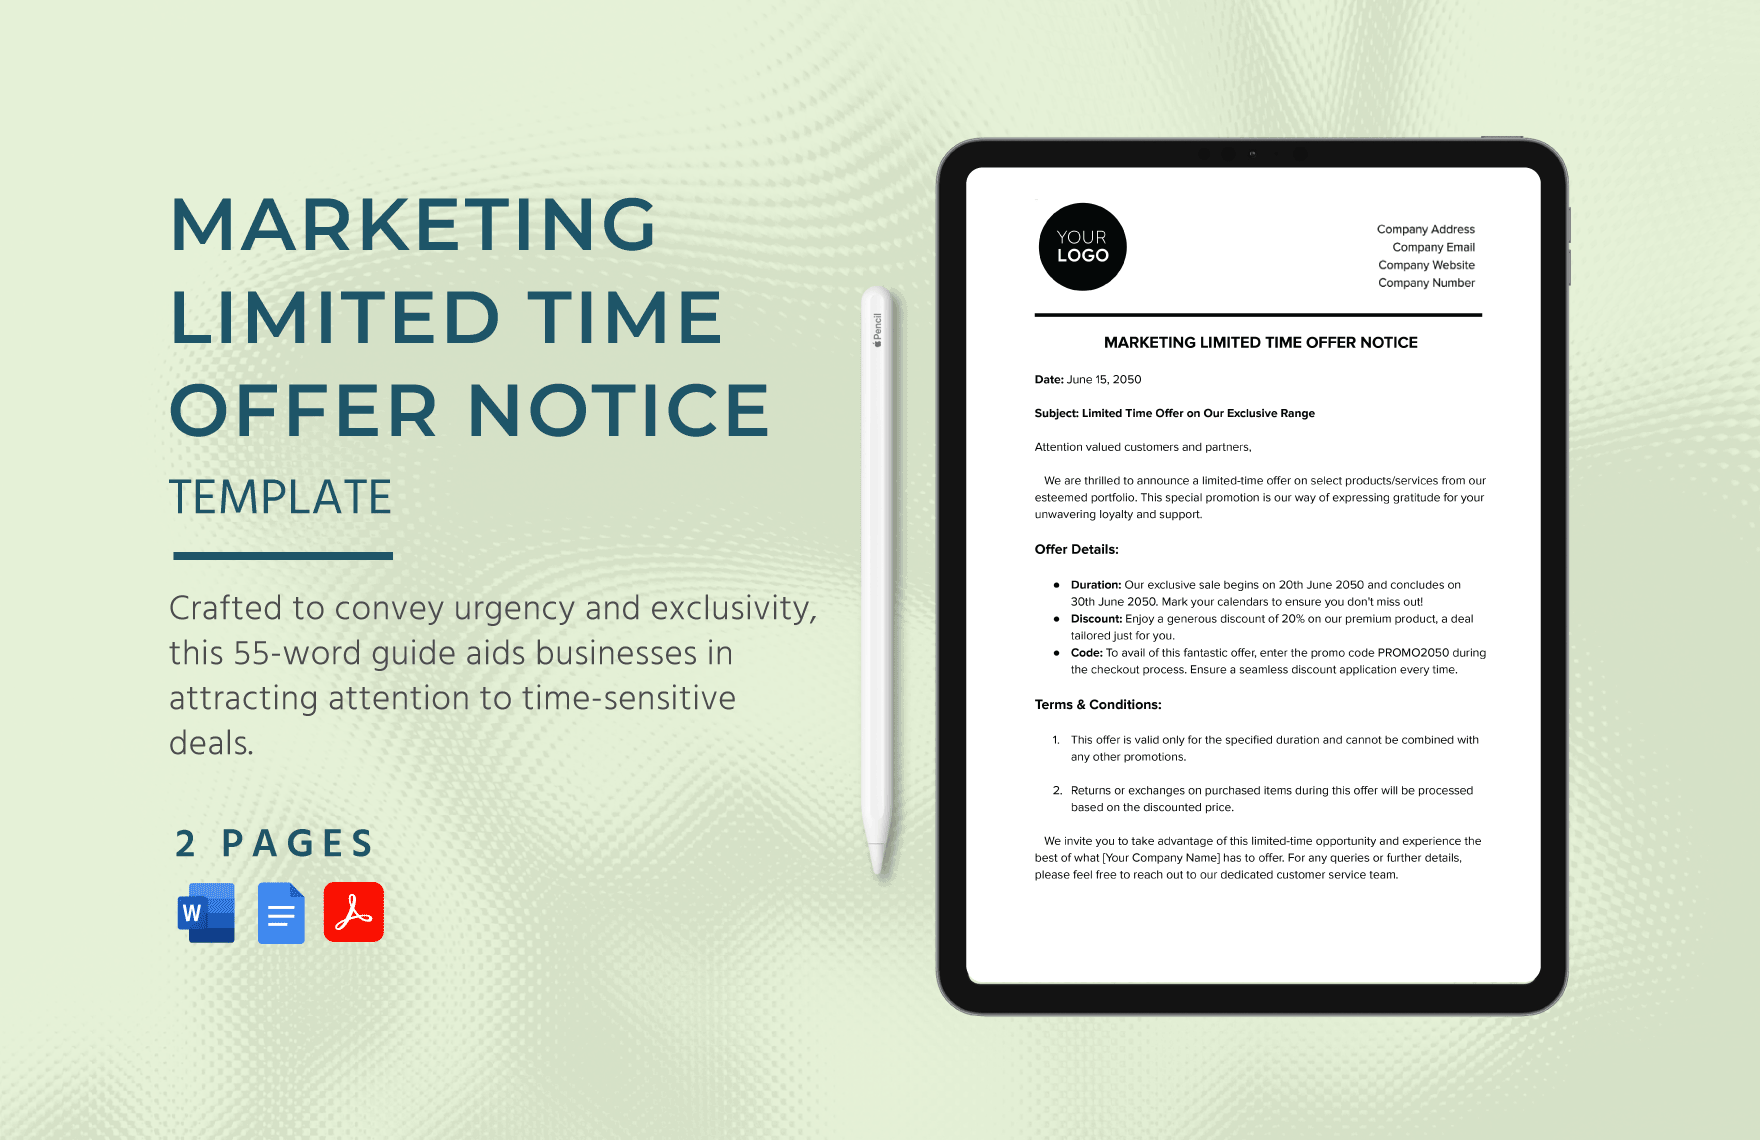 Marketing Limited Time Offer Notice Template in Word, Google Docs, PDF